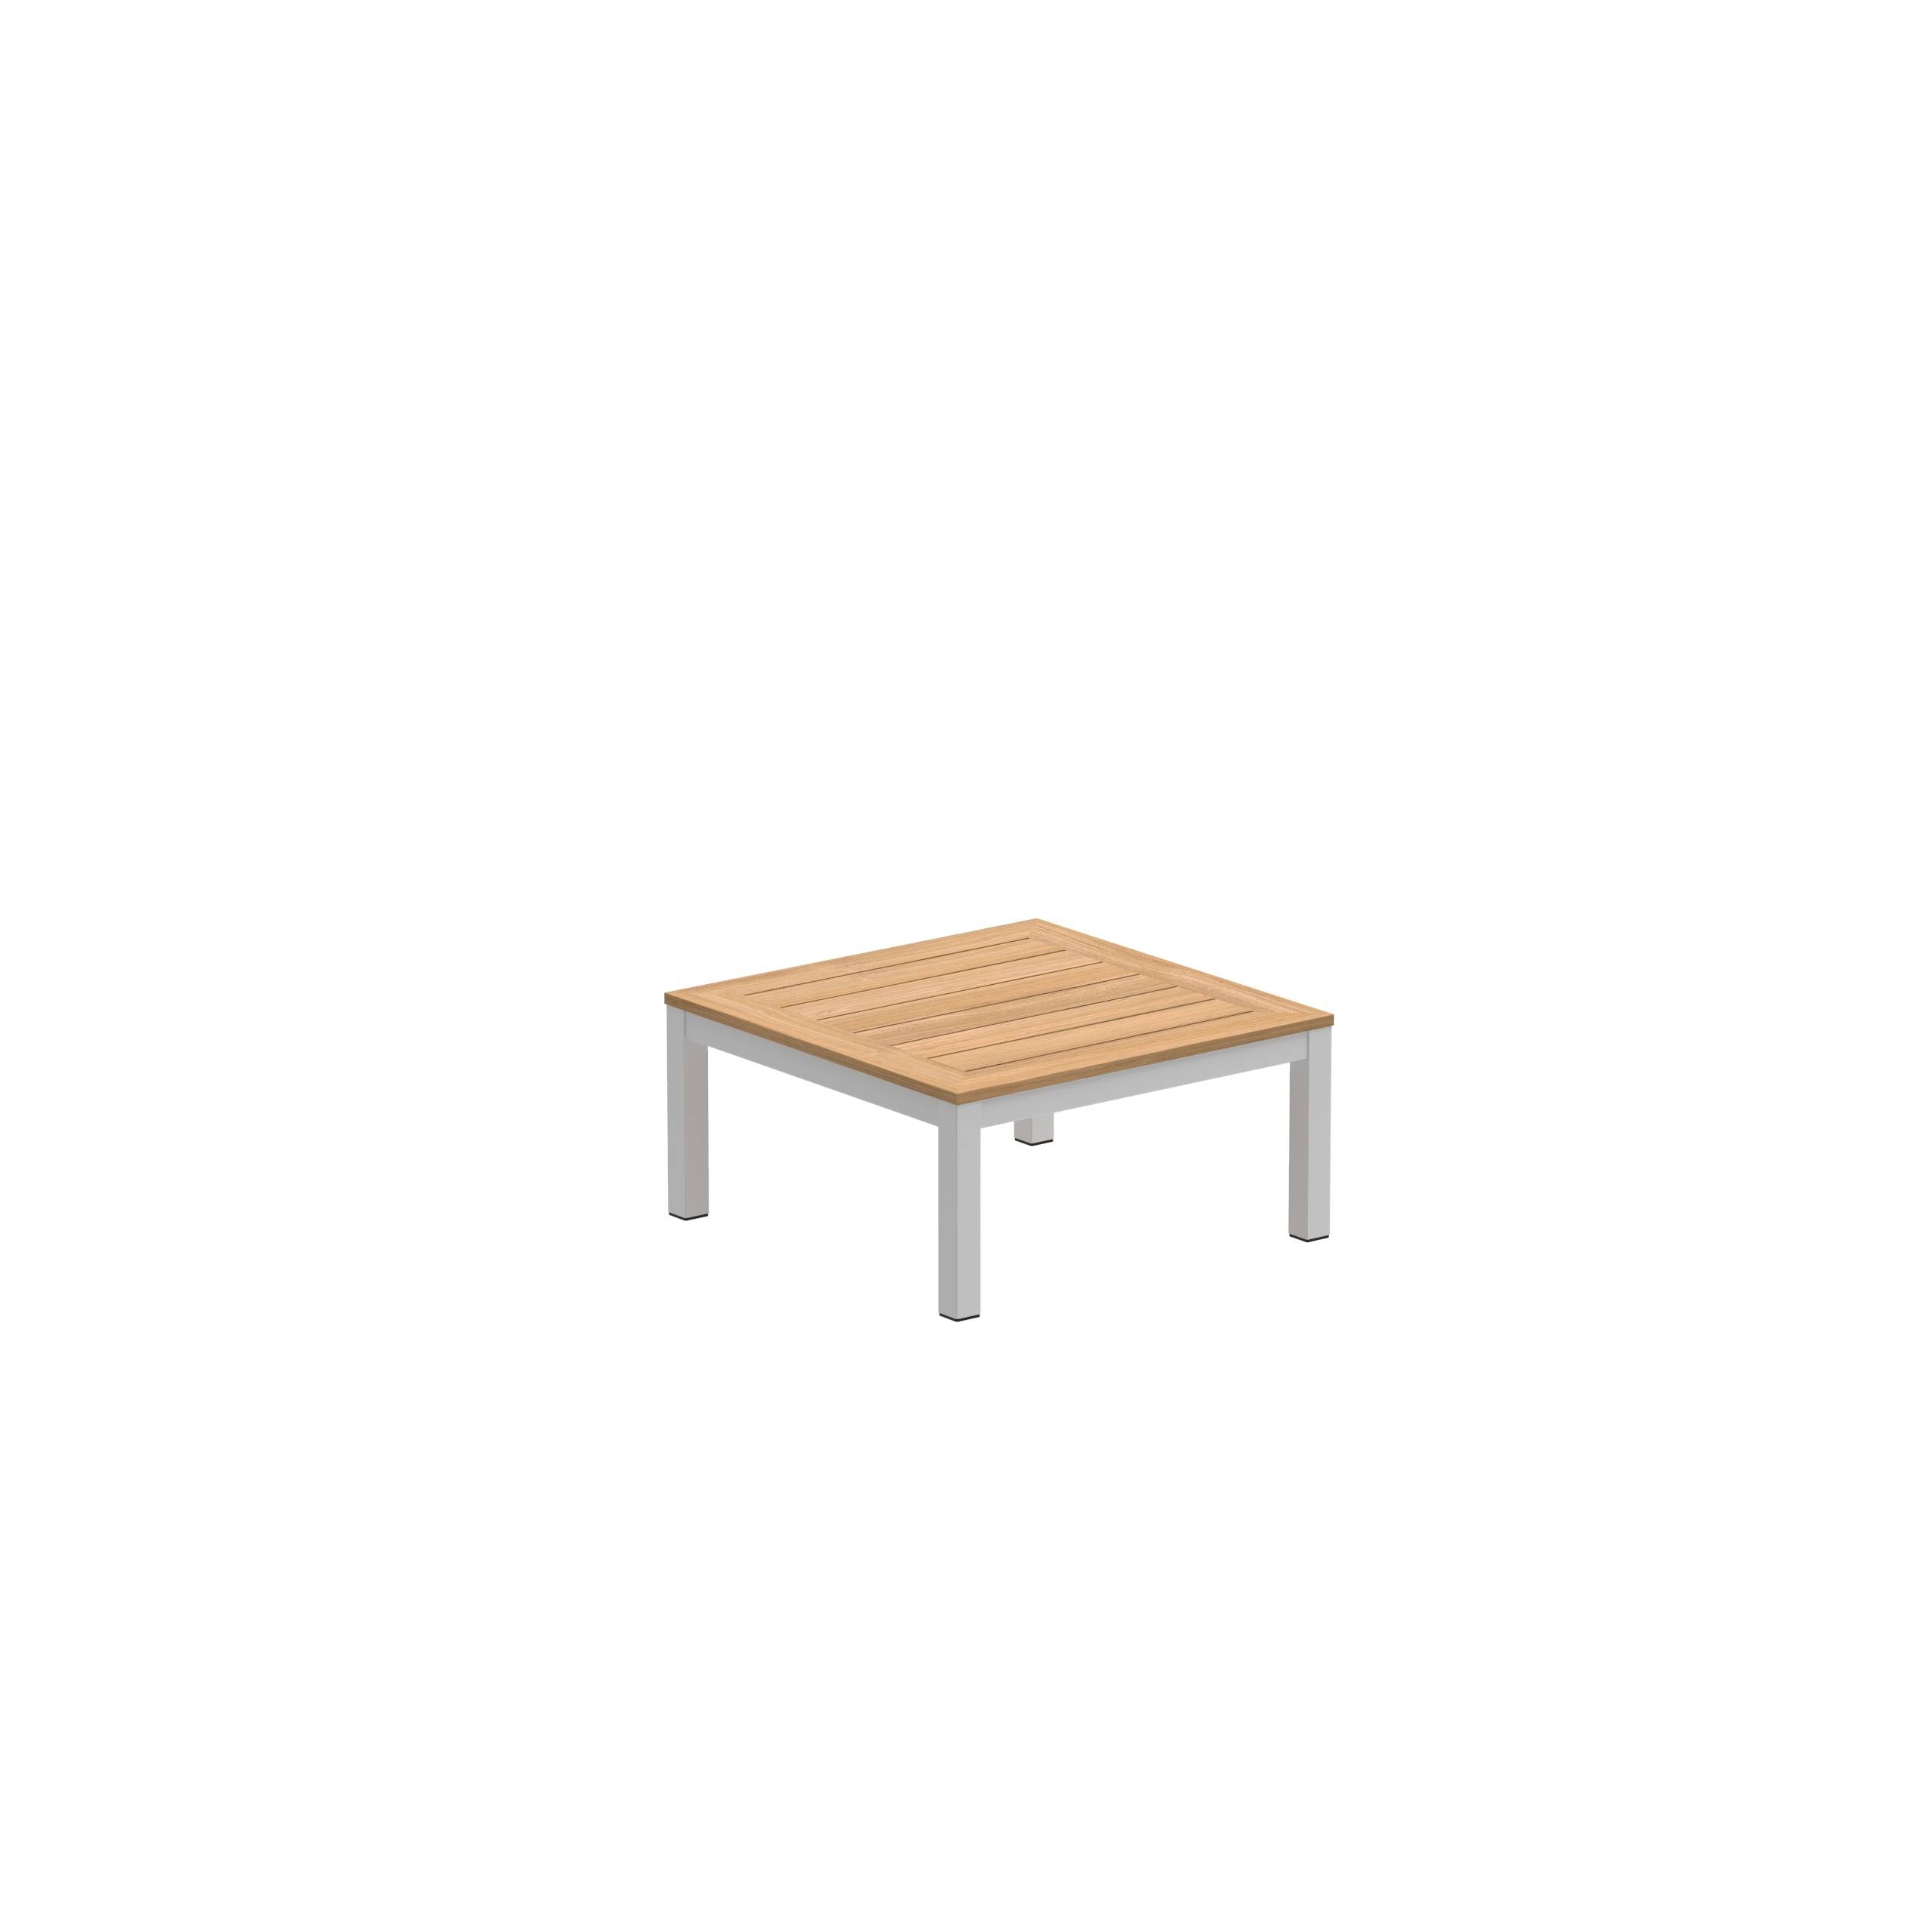 Taboela Low Table 80x80cm White With Teak Tabletop